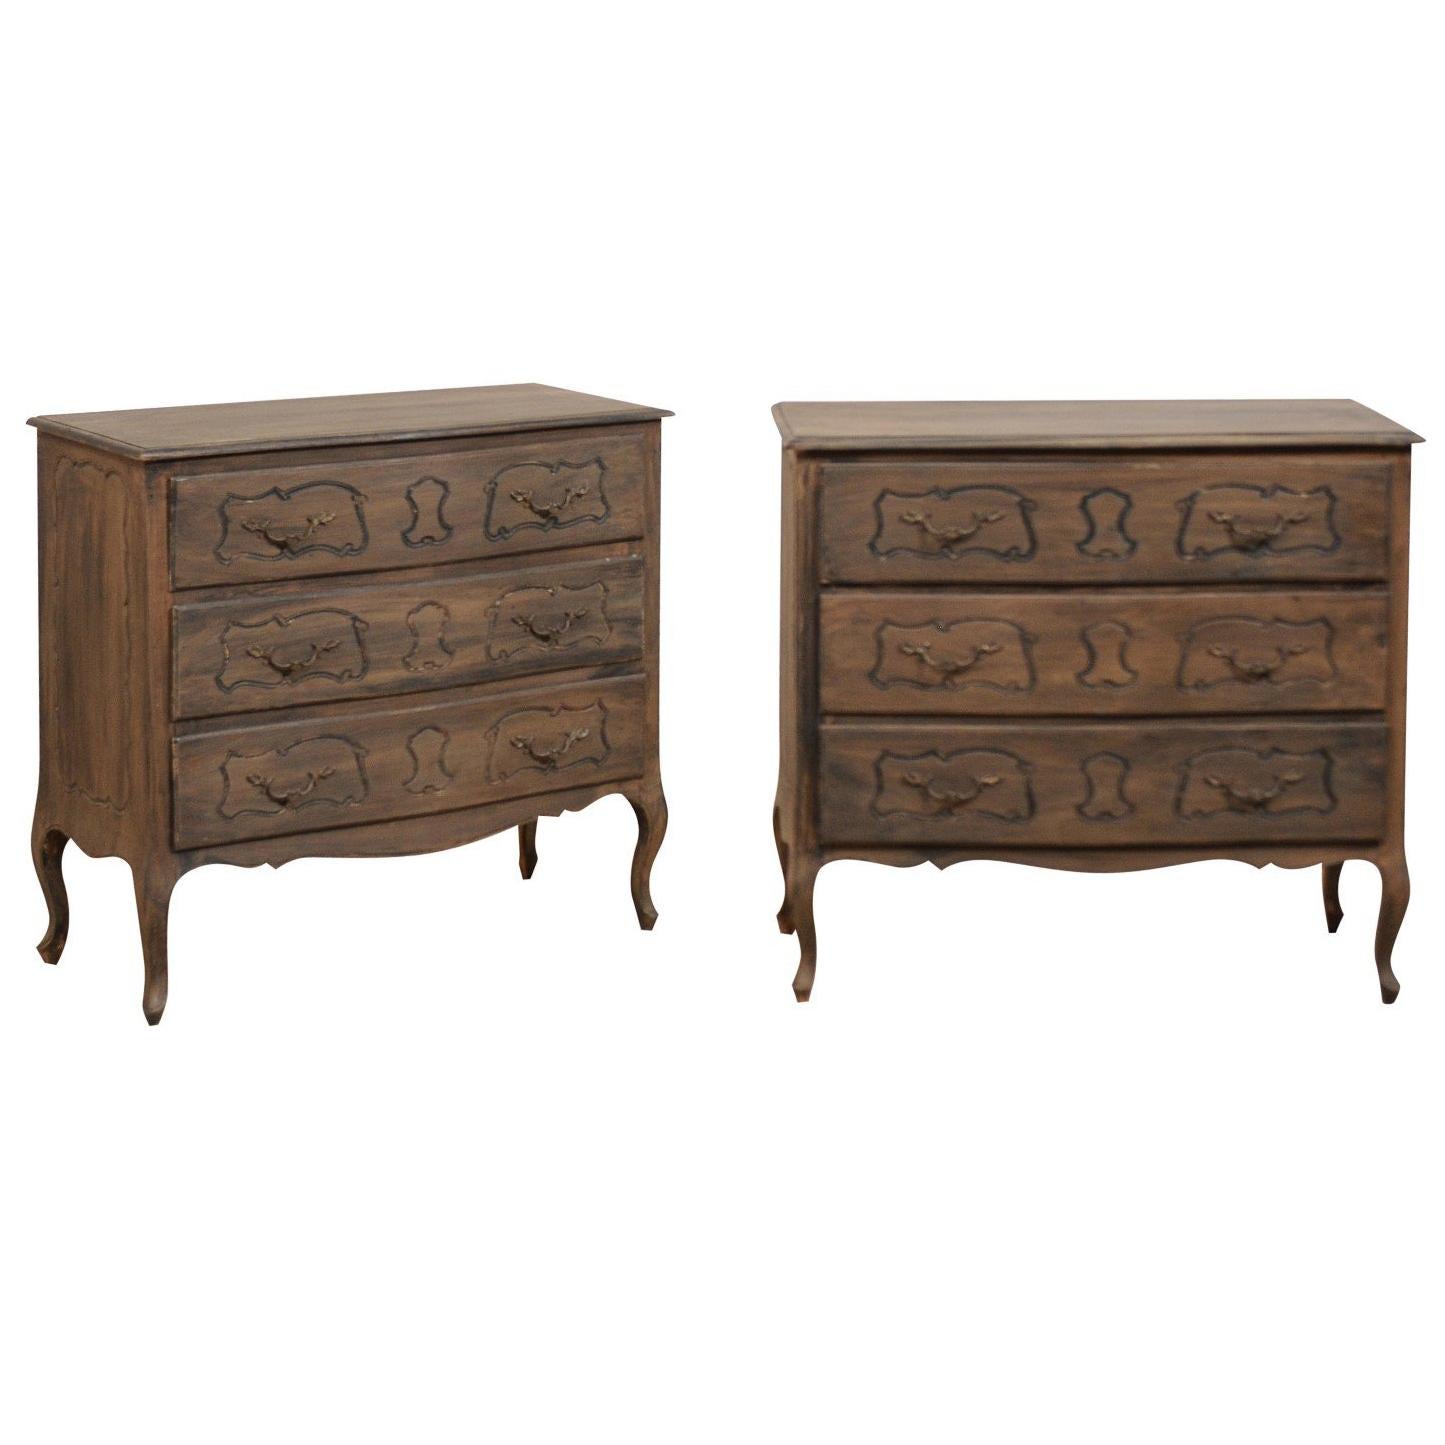 Pair of Mid-20th Century Painted and Carved Wood Chests on Cabriole Legs